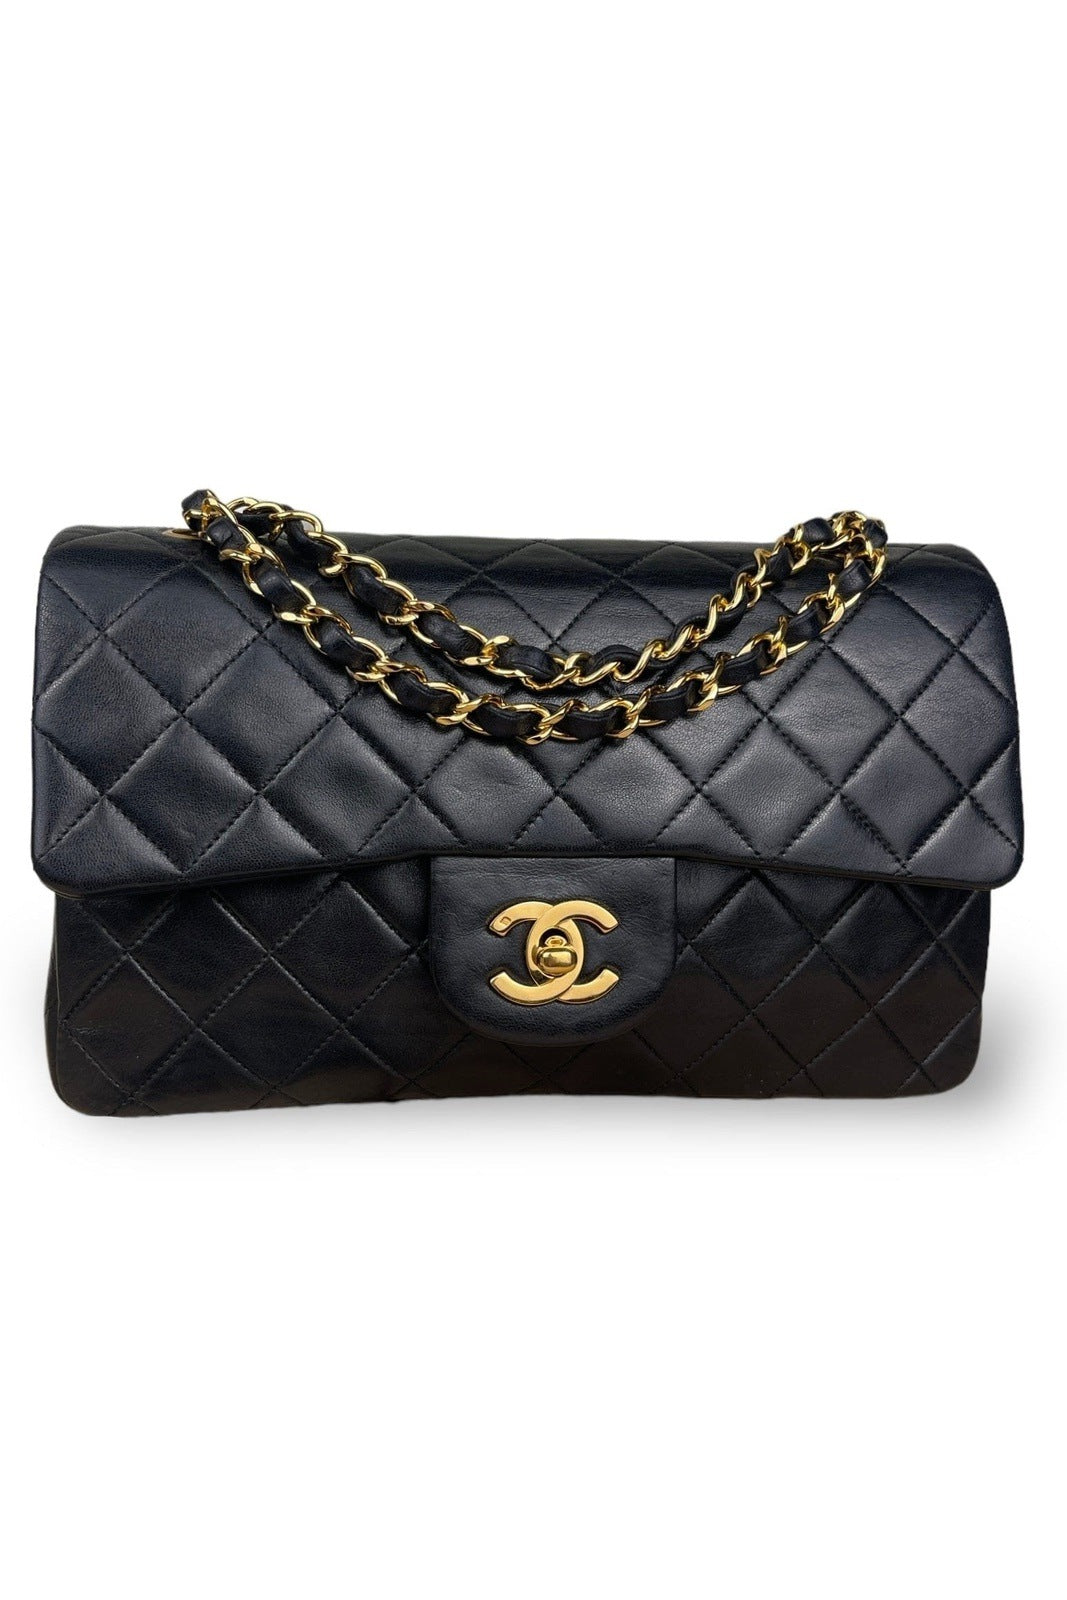 Chanel Burgundy Quilted Lambskin Small Classic Double Flap Bag